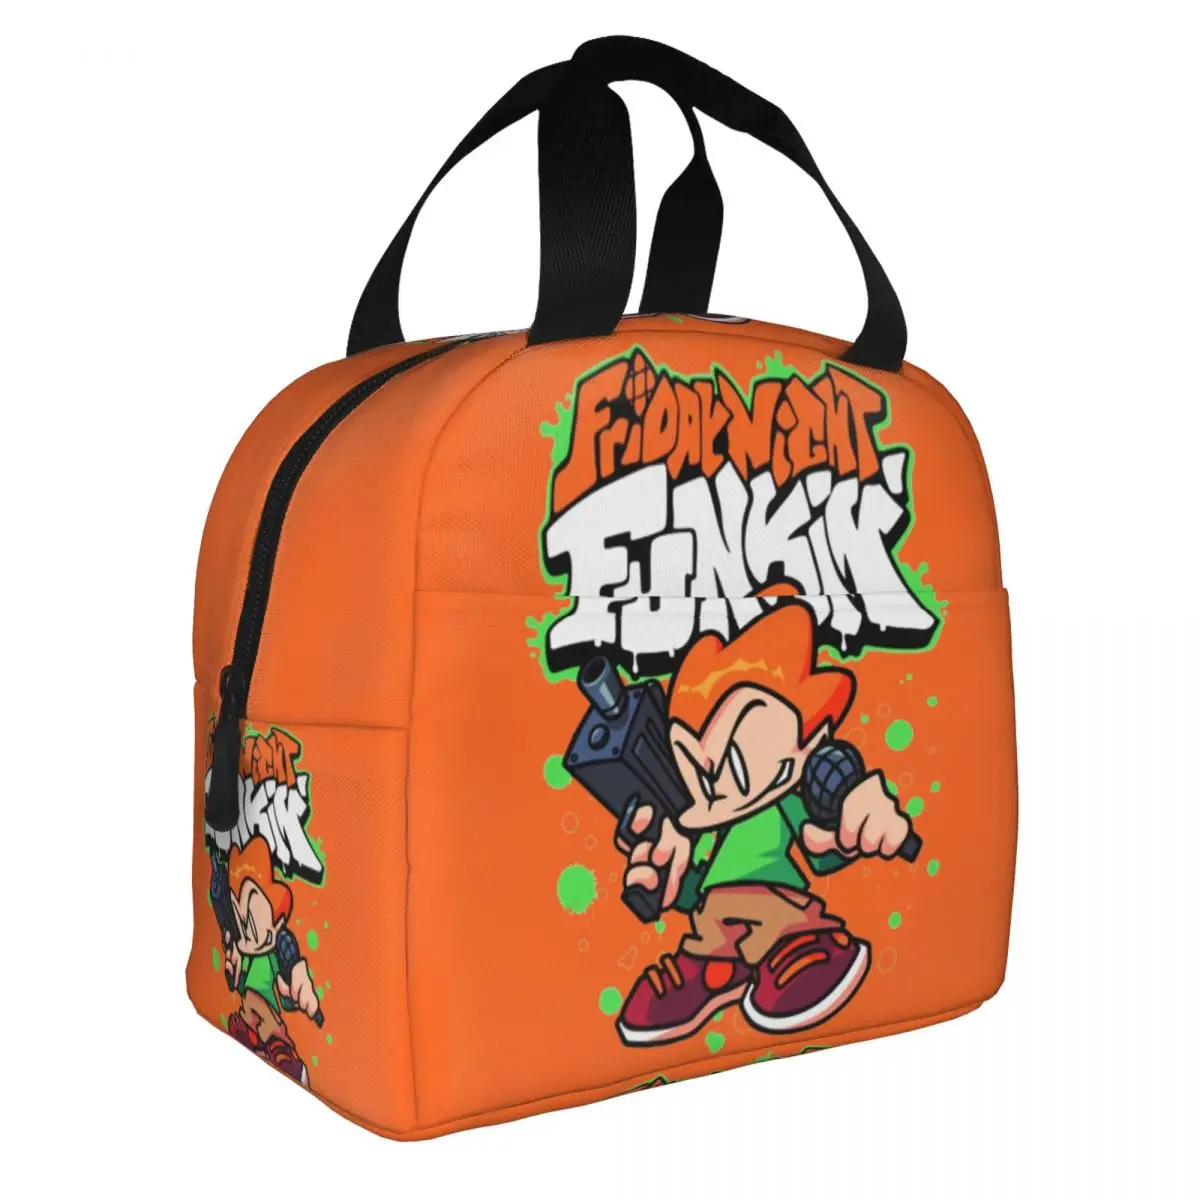 

Friday Night Funkin Pico Insulated Lunch Bag Thermal Bag Meal Container Portable Tote Lunch Box Food Bag Work Outdoor